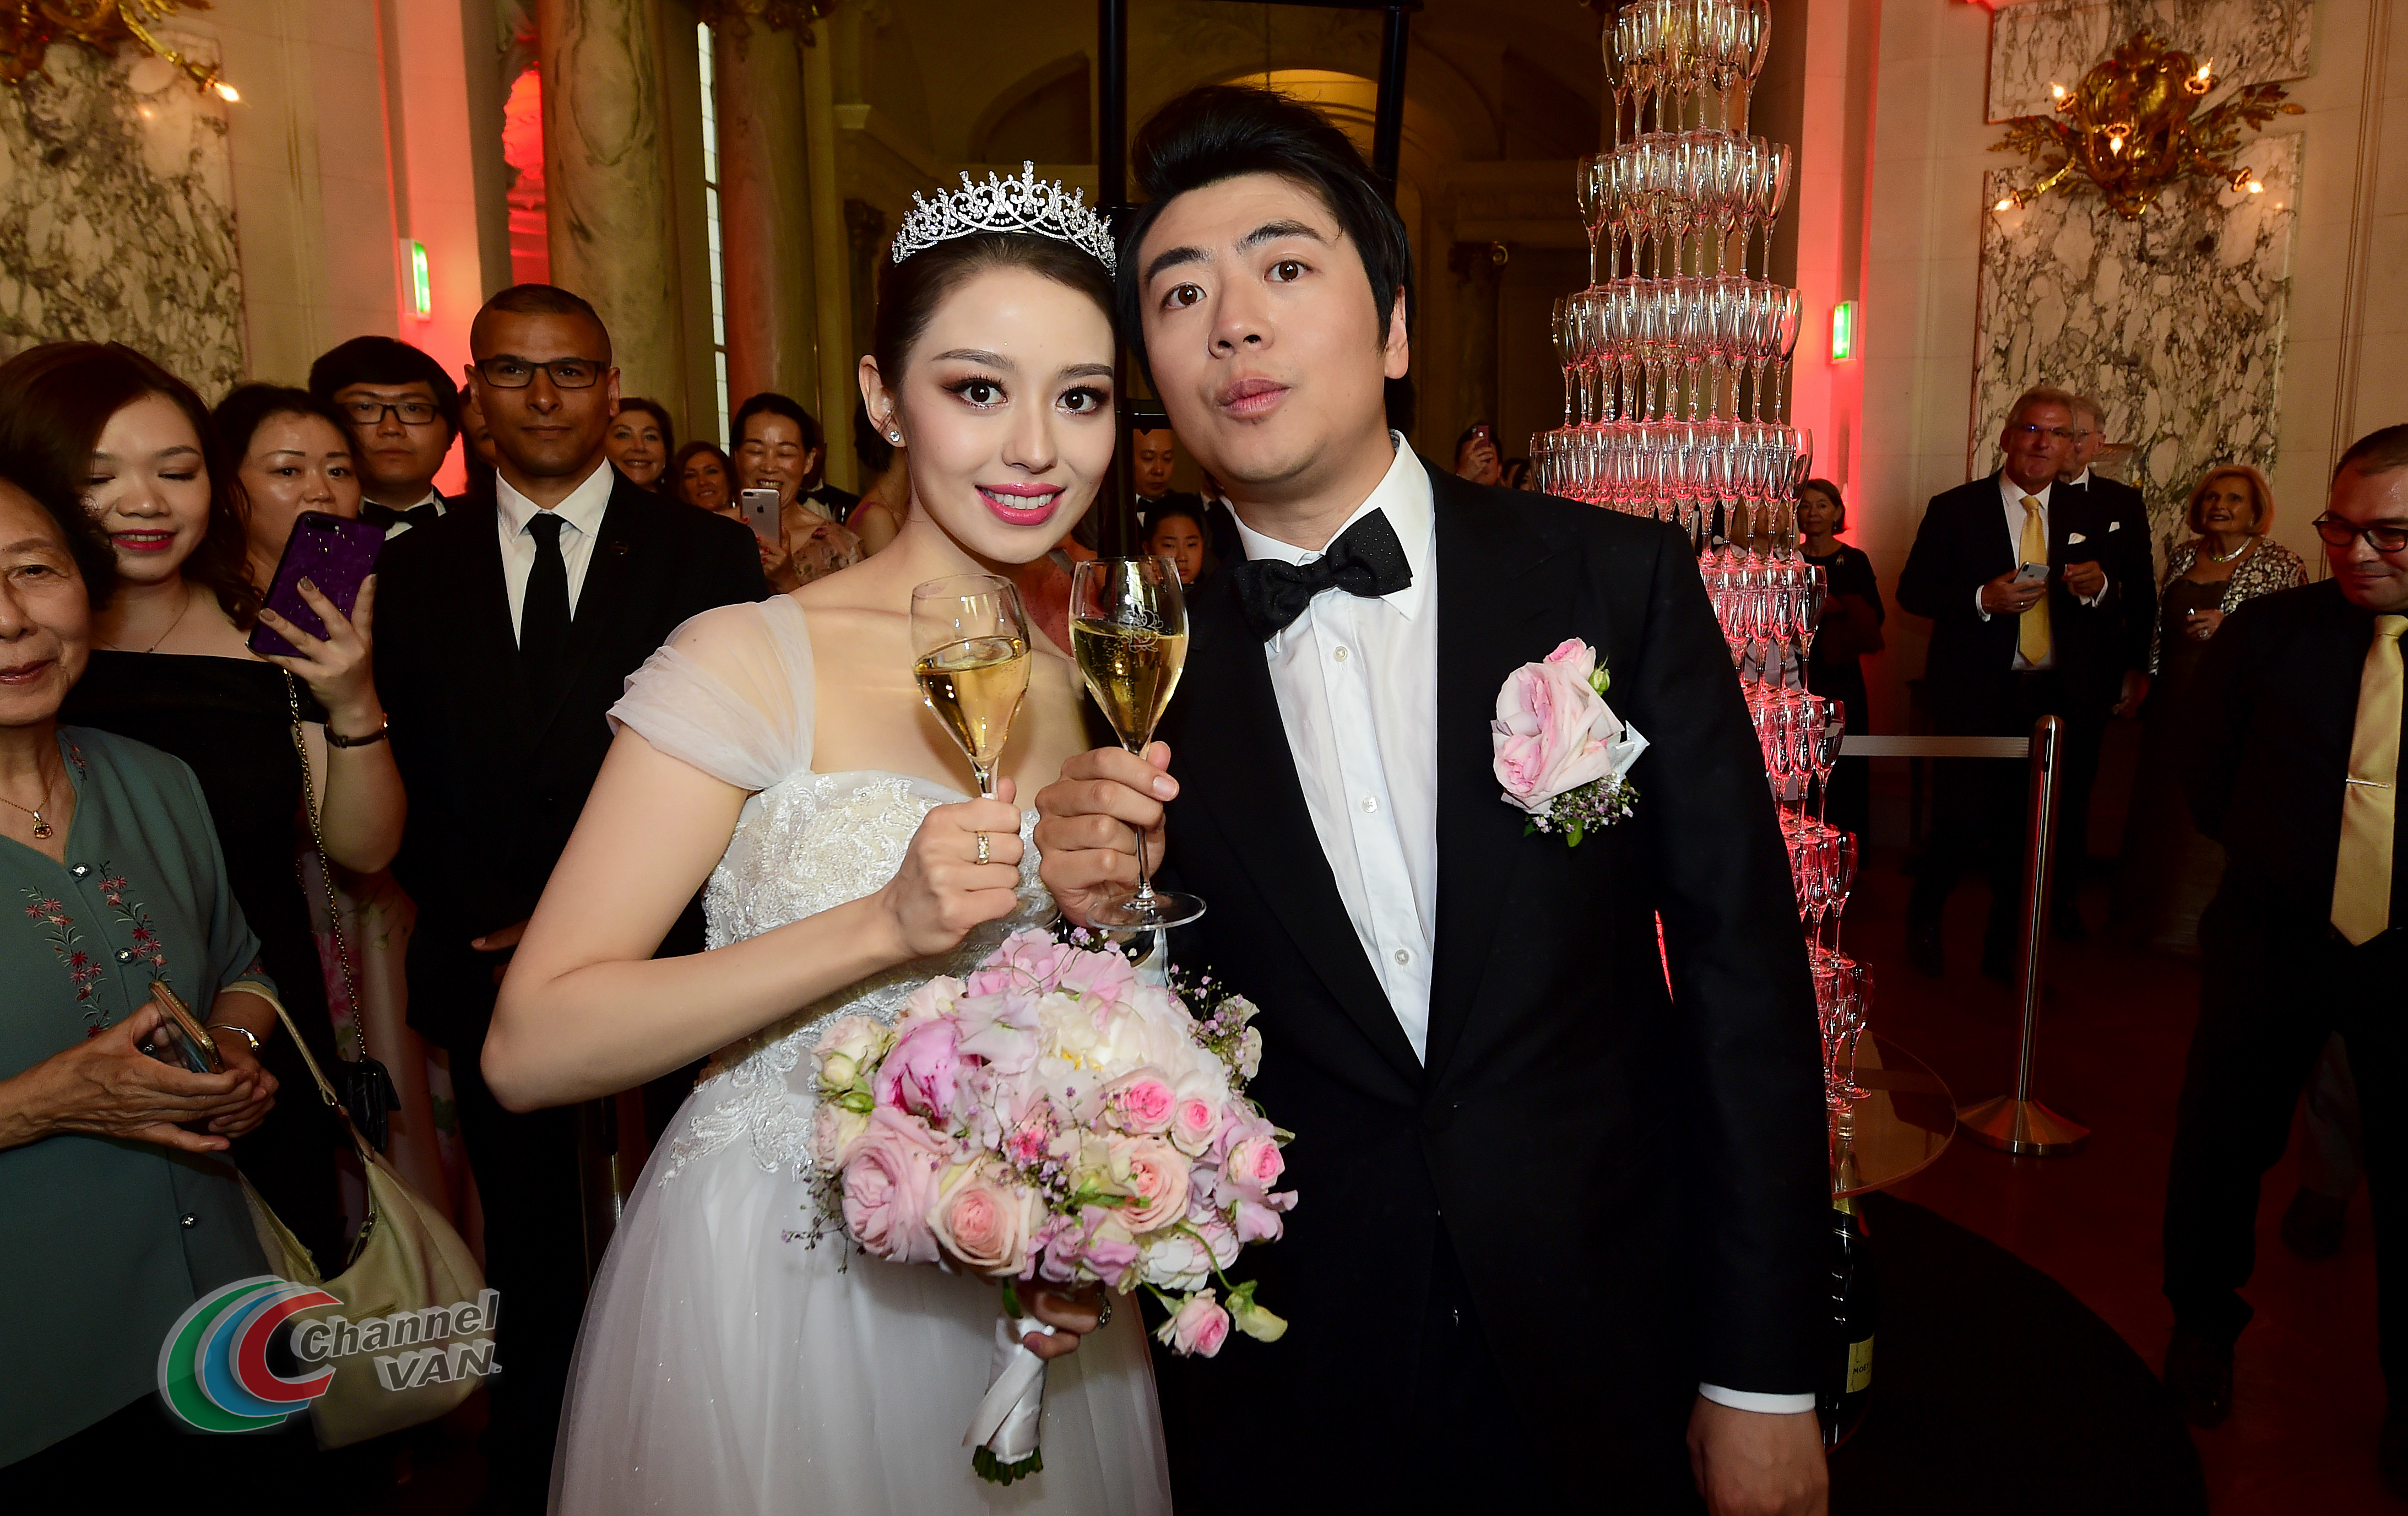 PARIS, FRANCE - JUNE 02: Pianists Lang Lang & Gina Alice drink a glass of Moet et Chandon Champagne during their Cocktail Wedding at Hotel Shangri-La on June 02, 2019 in Paris, France. (Photo by Anthony Ghnassia/Getty Images for Moet Henessy)